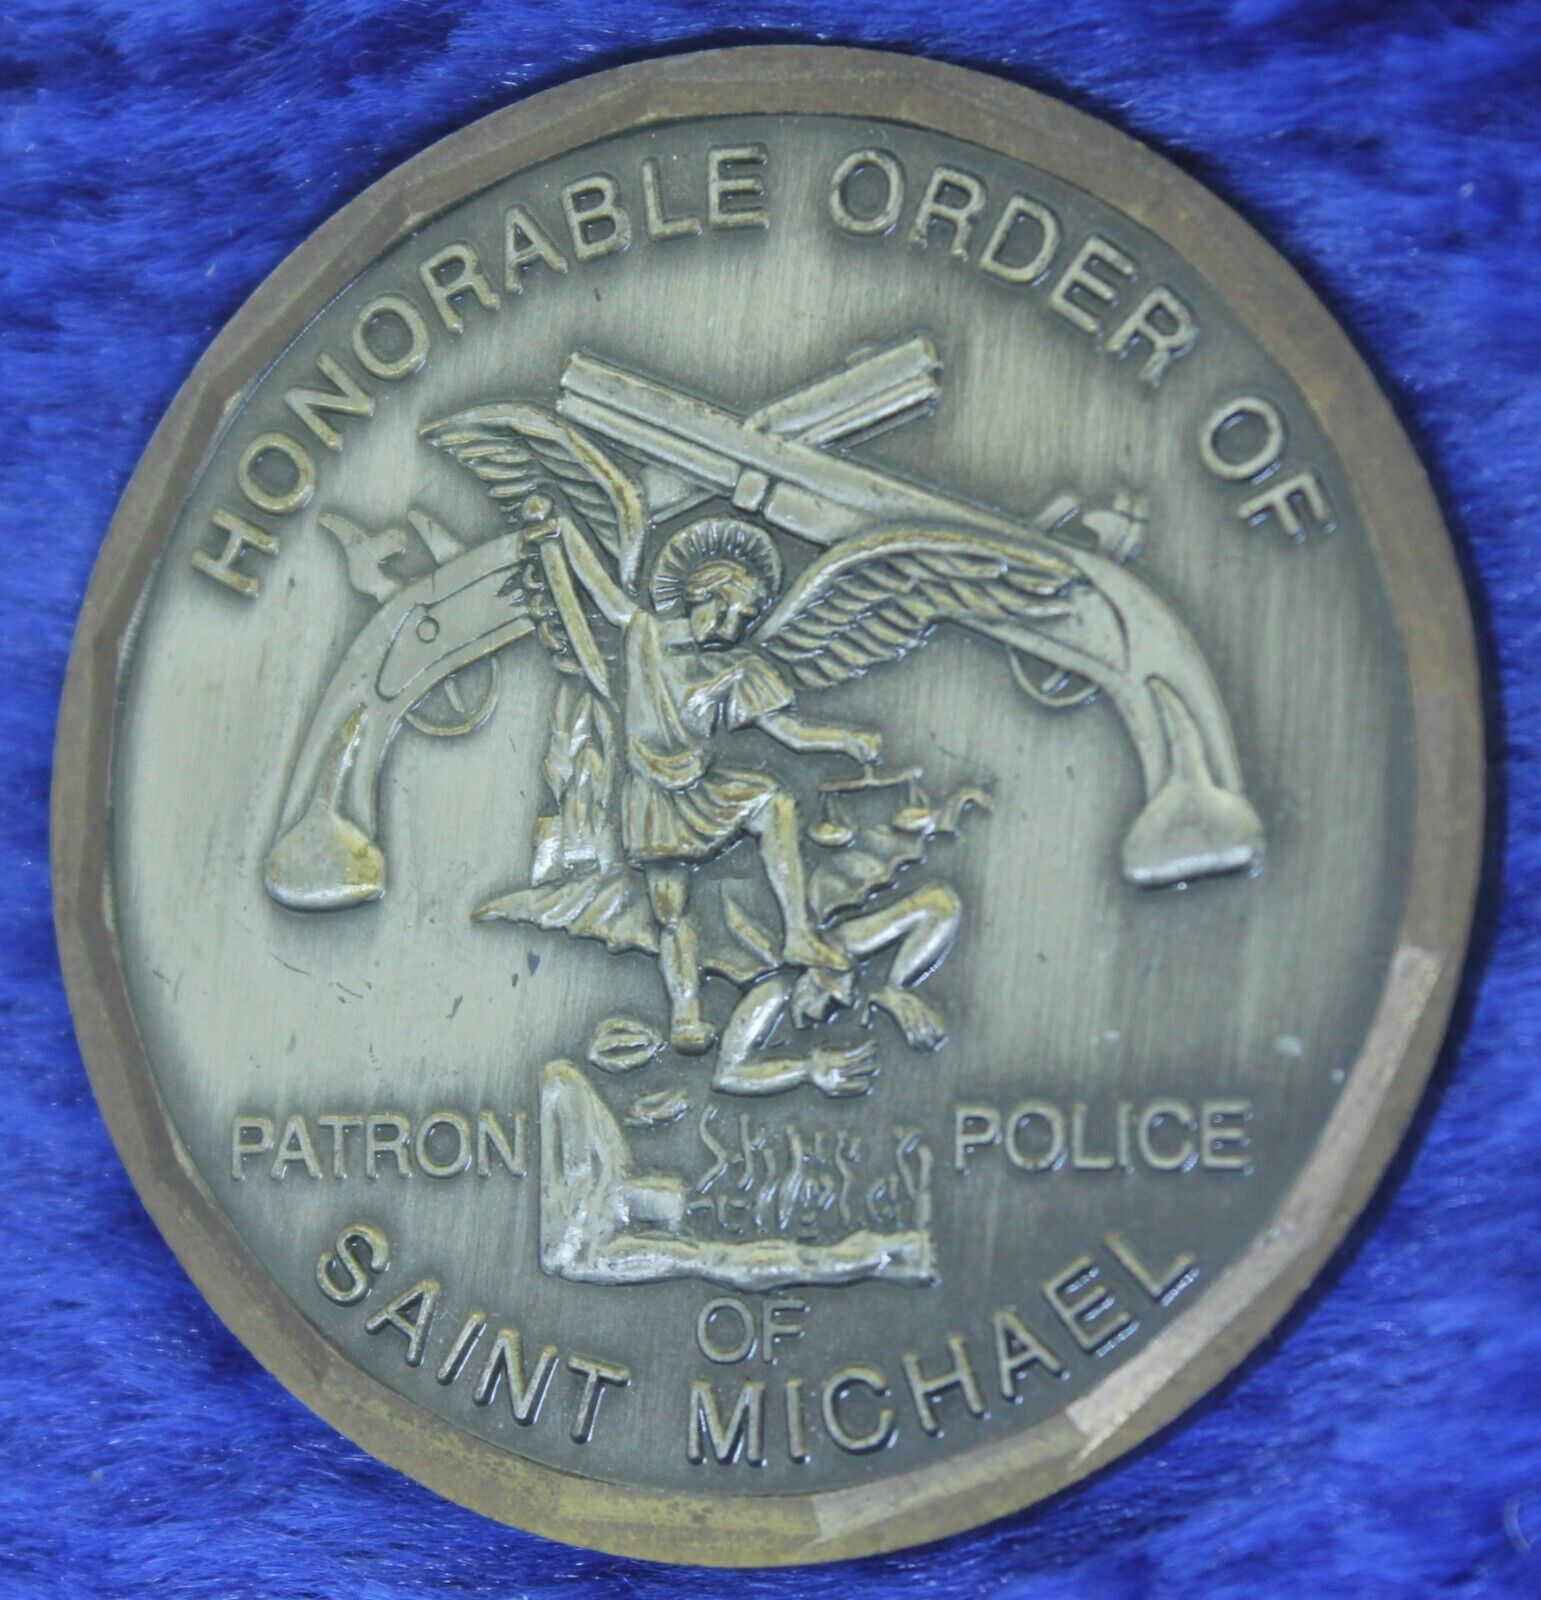 US Army Provost Marshal Saint Michael Military Police Challenge Coin PT-5